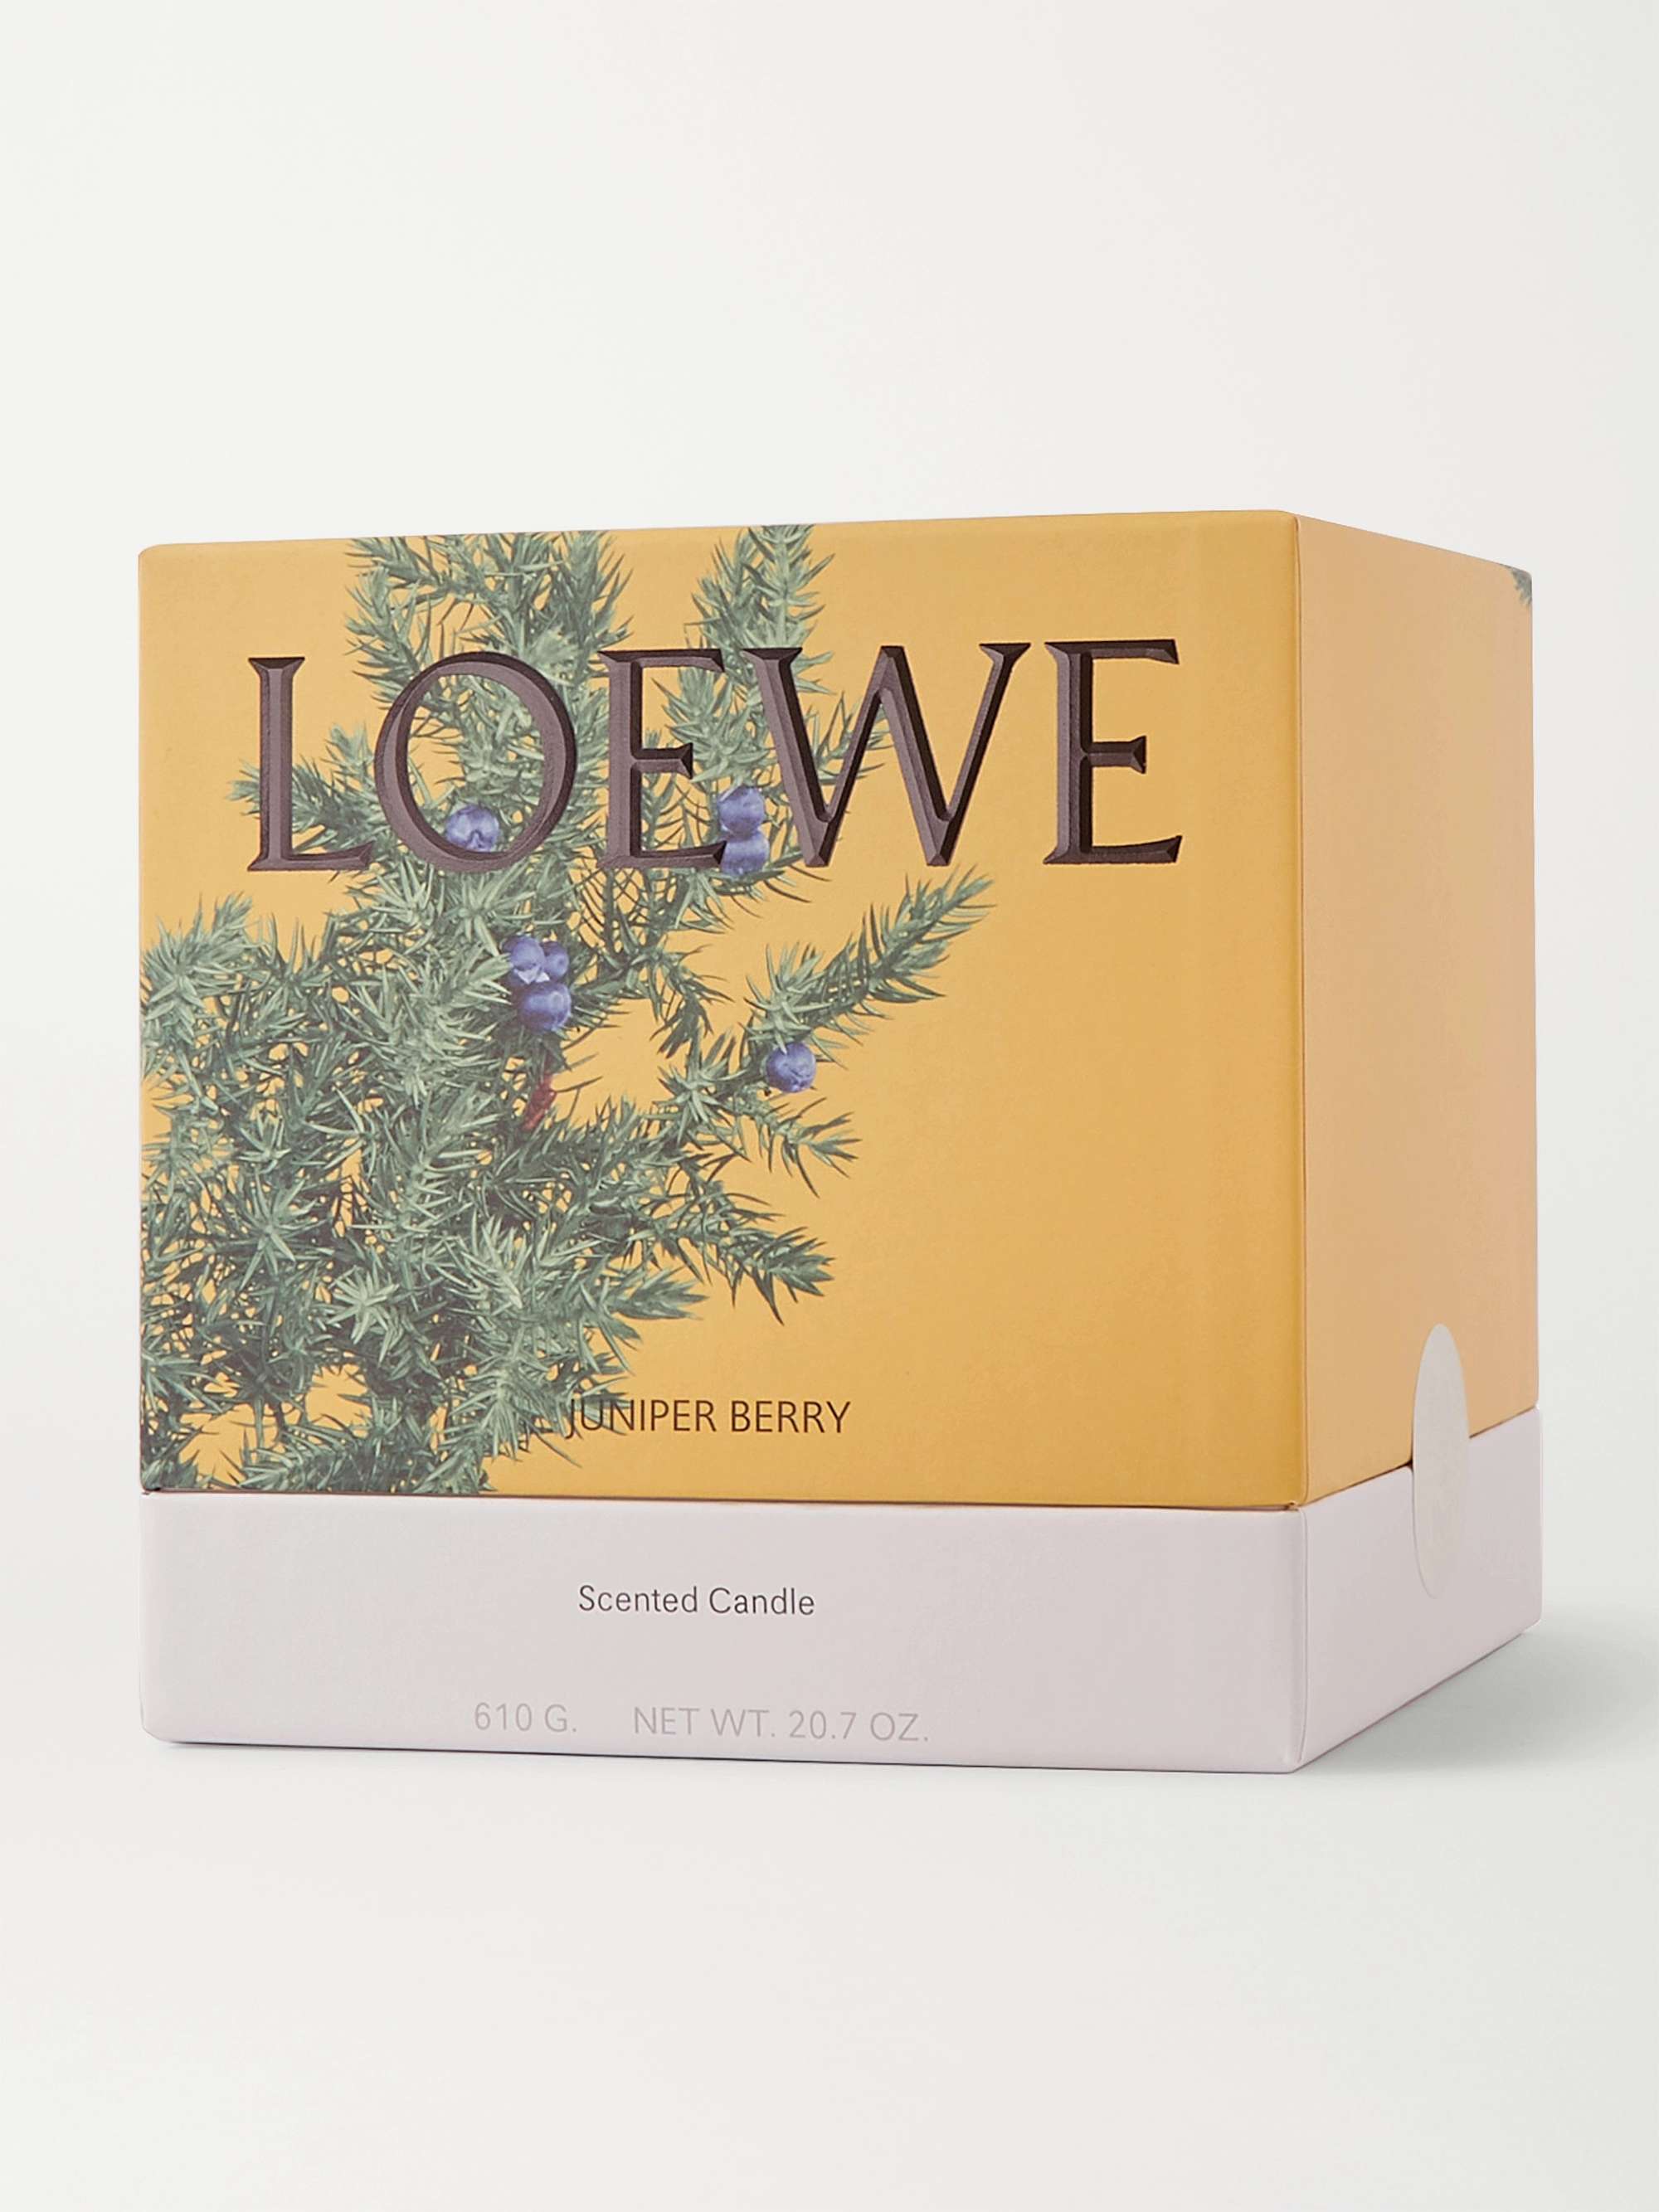 LOEWE HOME SCENTS Juniper Berry Scented Candle, 170g